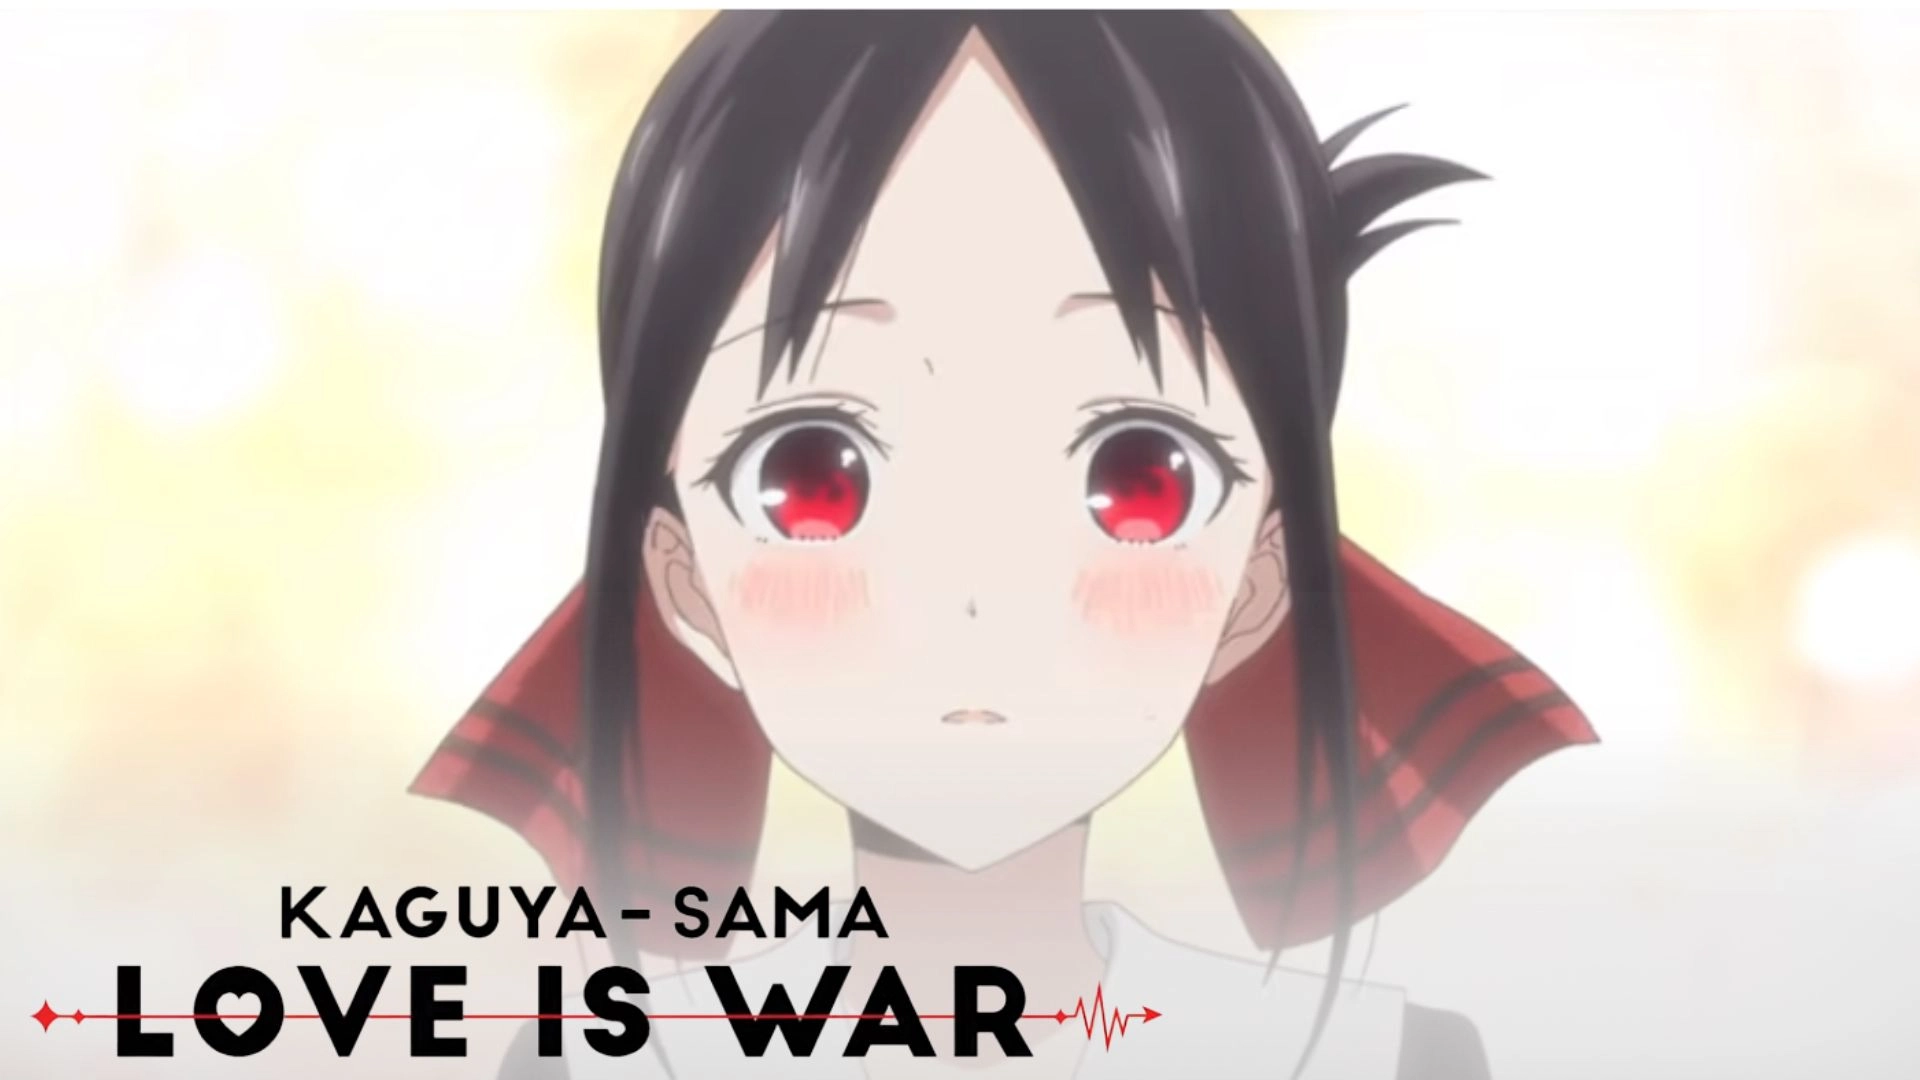 Kaguya-sama: Love is War Parents Guide and Age Rating (2022)